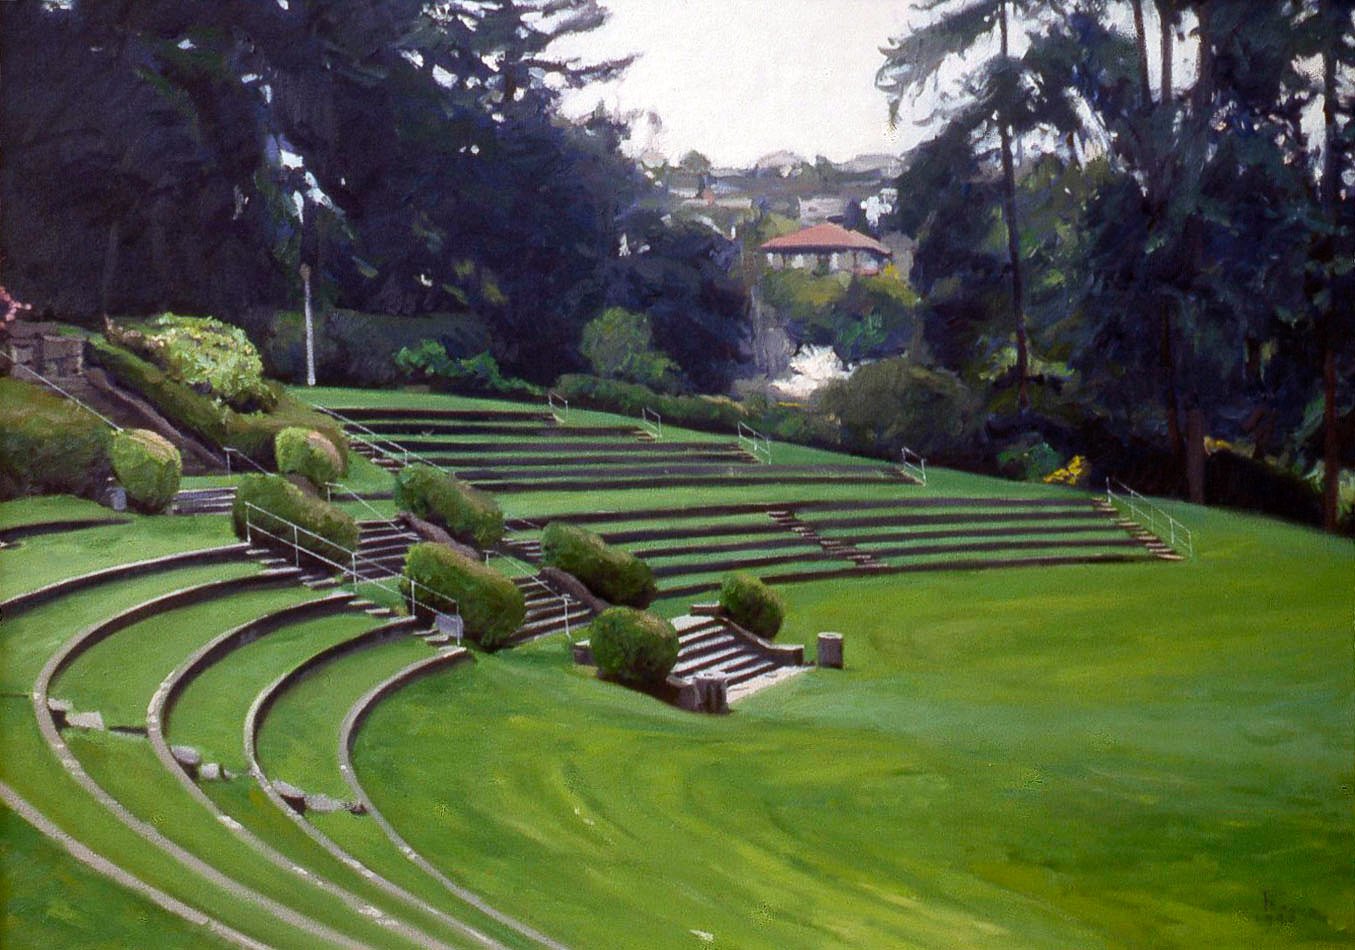 Ampitheater, oil on canvas, 30 X 42 inches, copyright ©1990